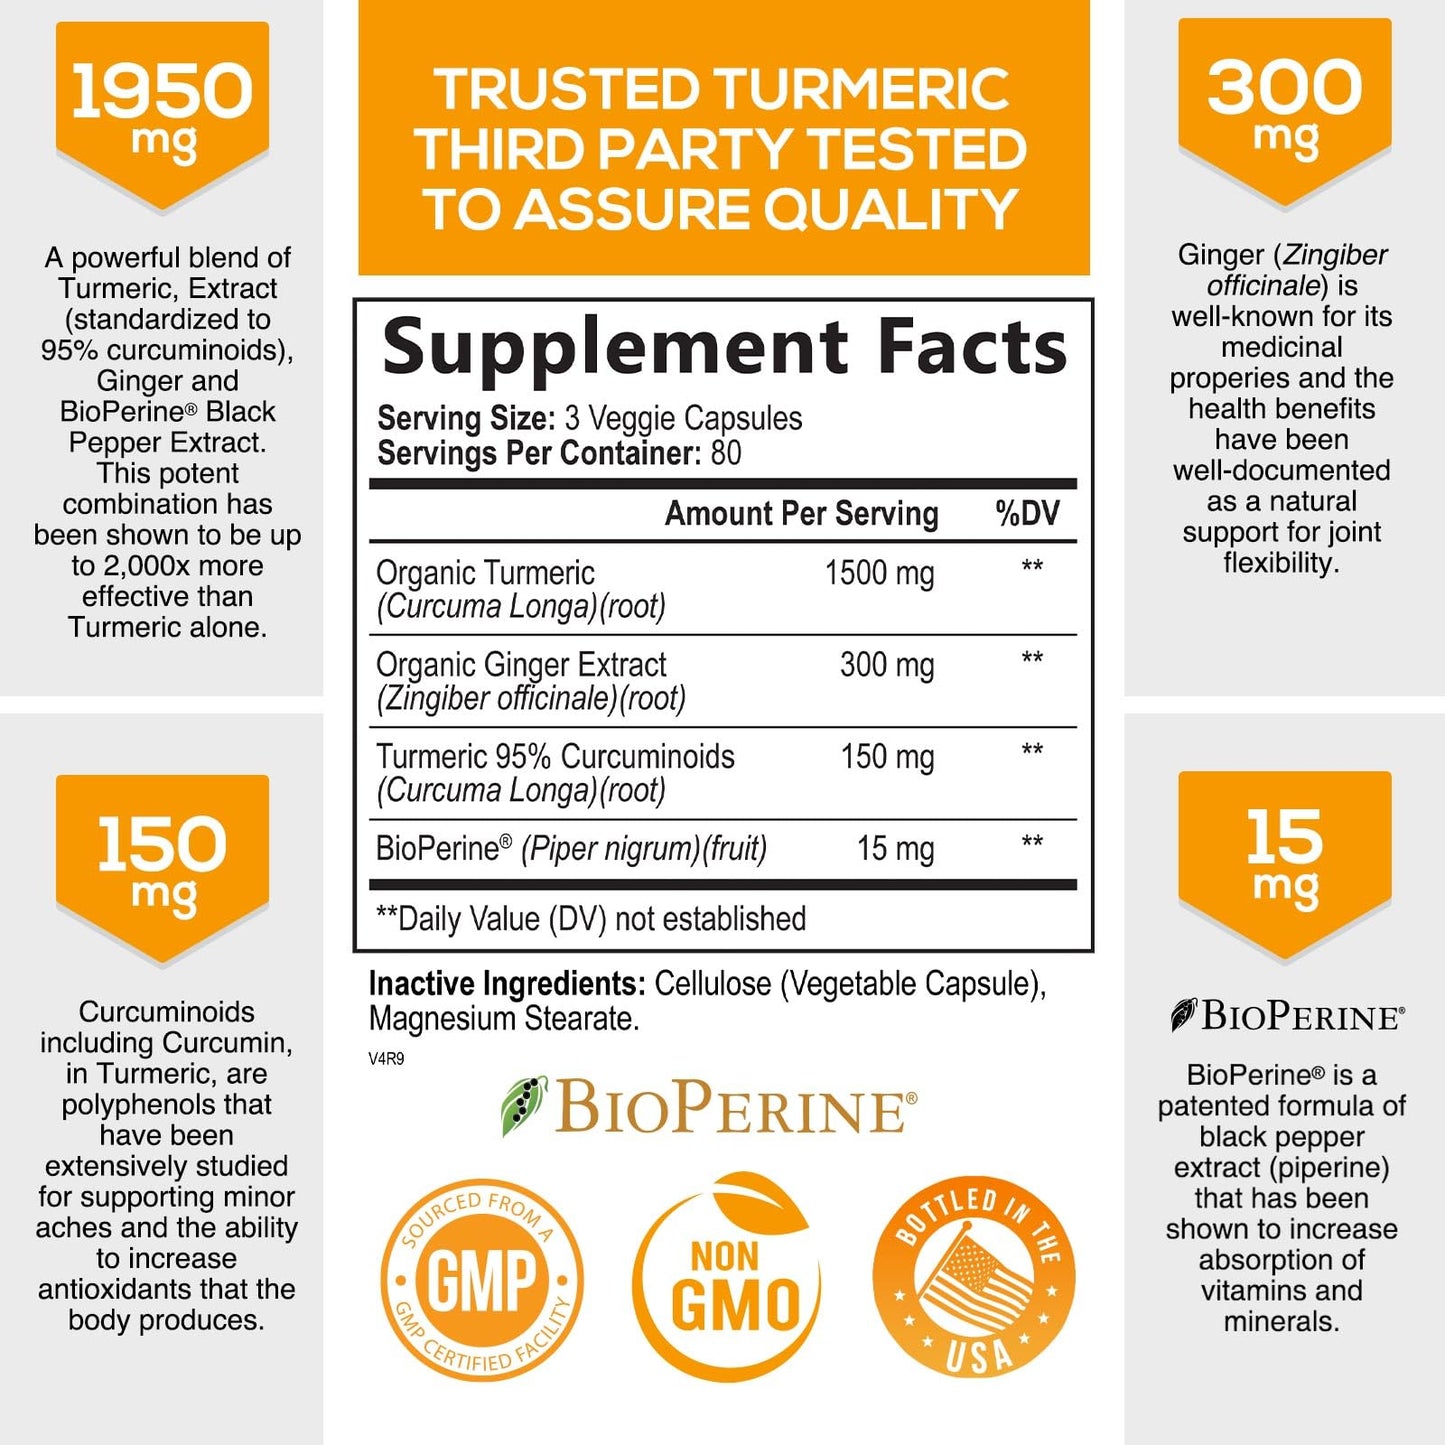 Turmeric Curcumin with BioPerine & Ginger 95% Standardized Curcuminoids 1950mg - Black Pepper for Max Absorption, Herbal Joint Support, Nature's Tumeric Extract Supplement, Vegan - 240 Capsules